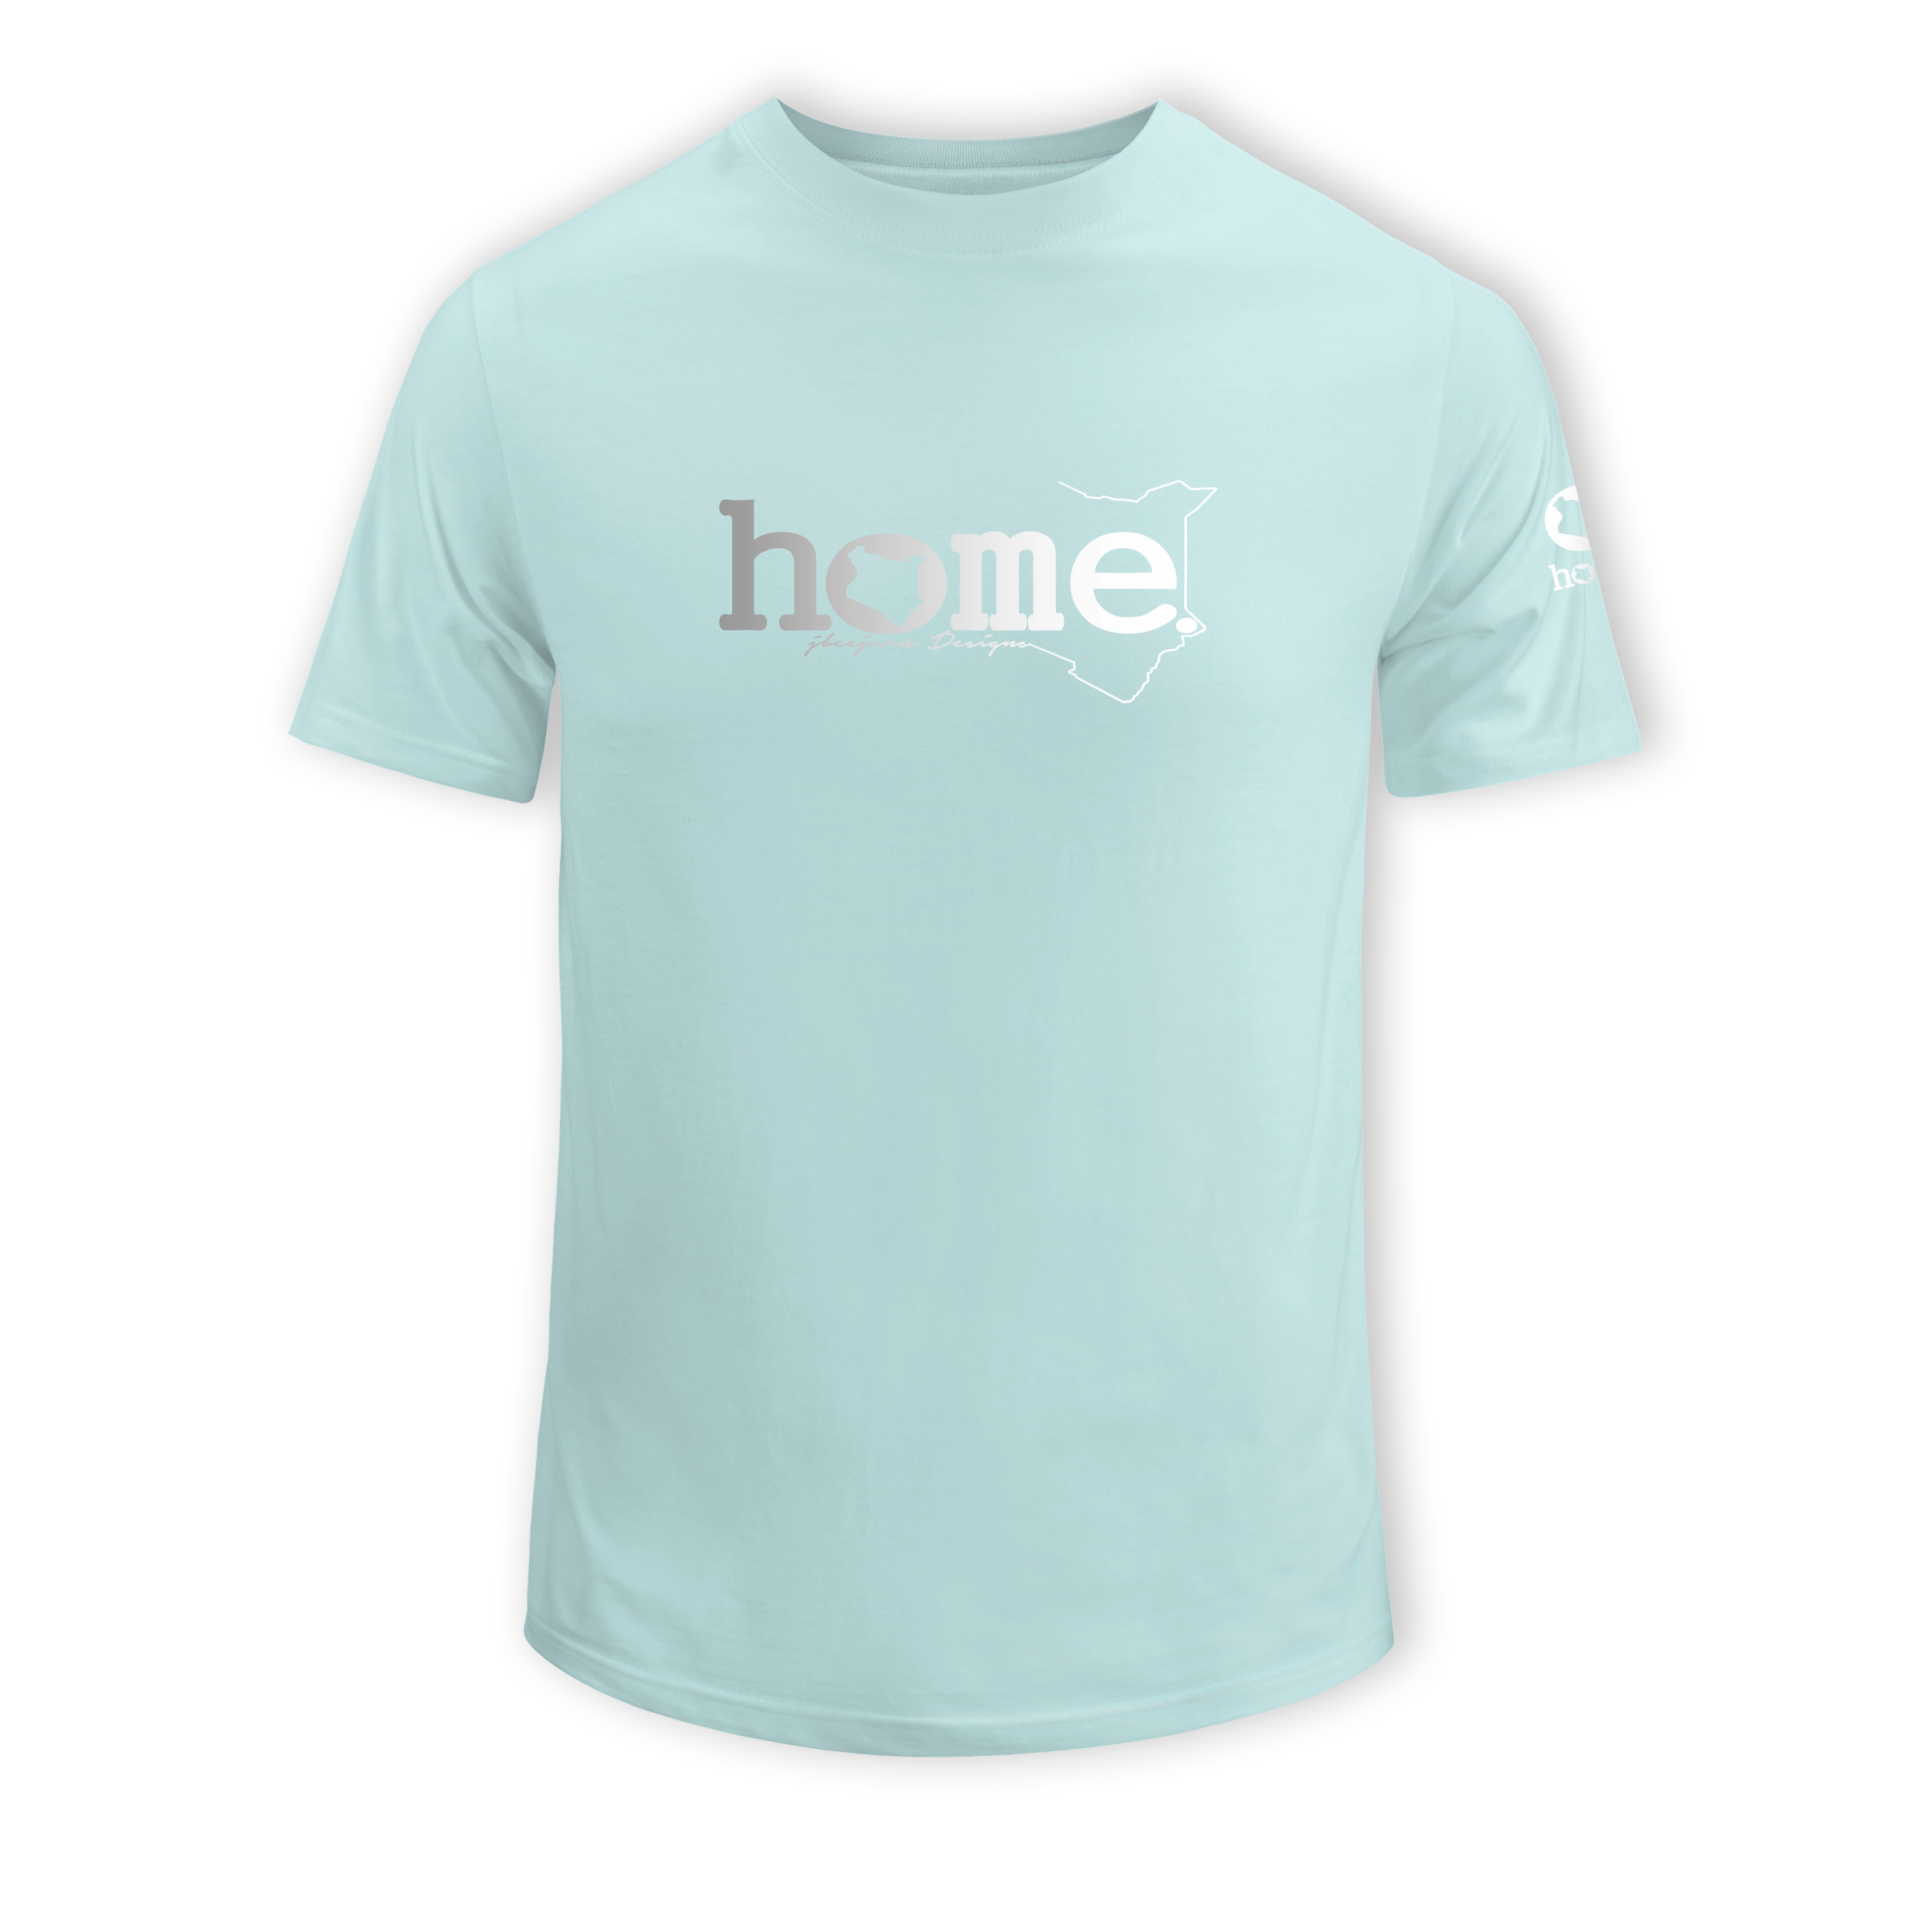 home_254 KIDS SHORT-SLEEVED MISTY BLUE T-SHIRT WITH A SILVER CLASSIC WORDS PRINT – COTTON PLUS FABRIC